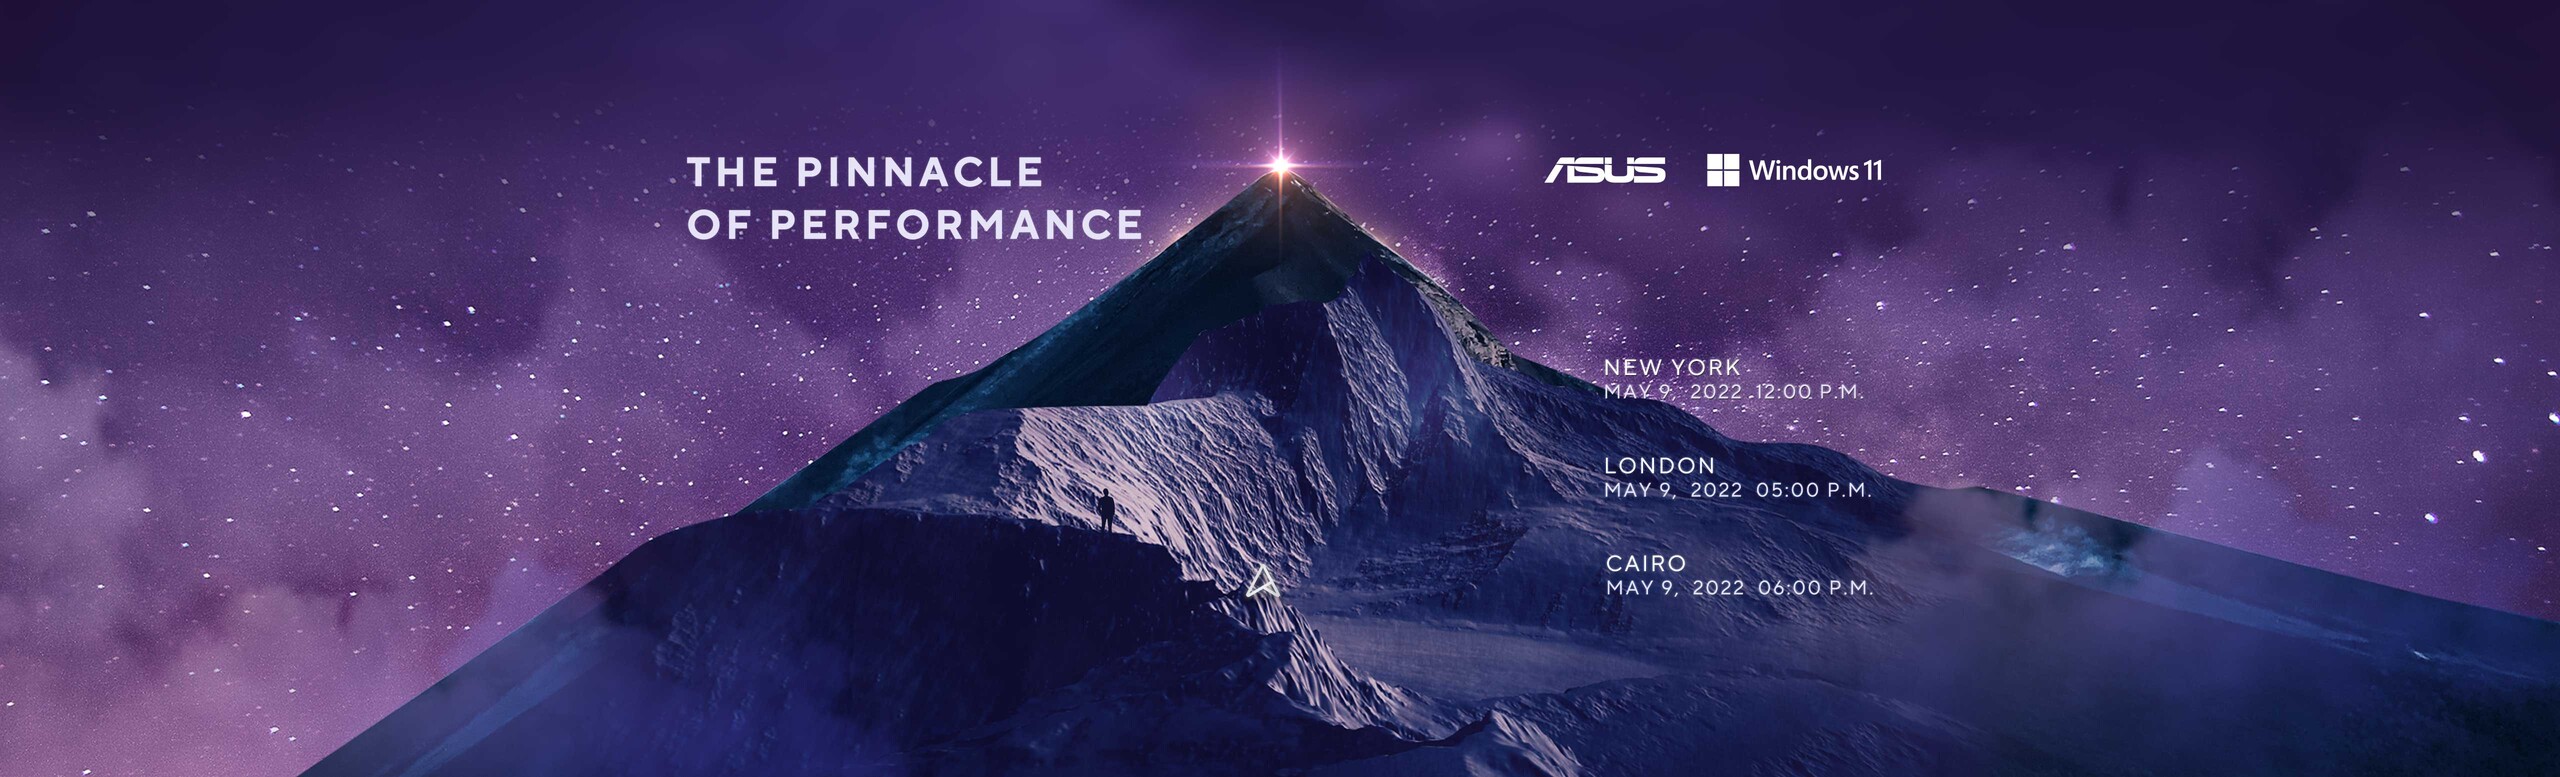 The Pinnacle of Performance 2022 Event